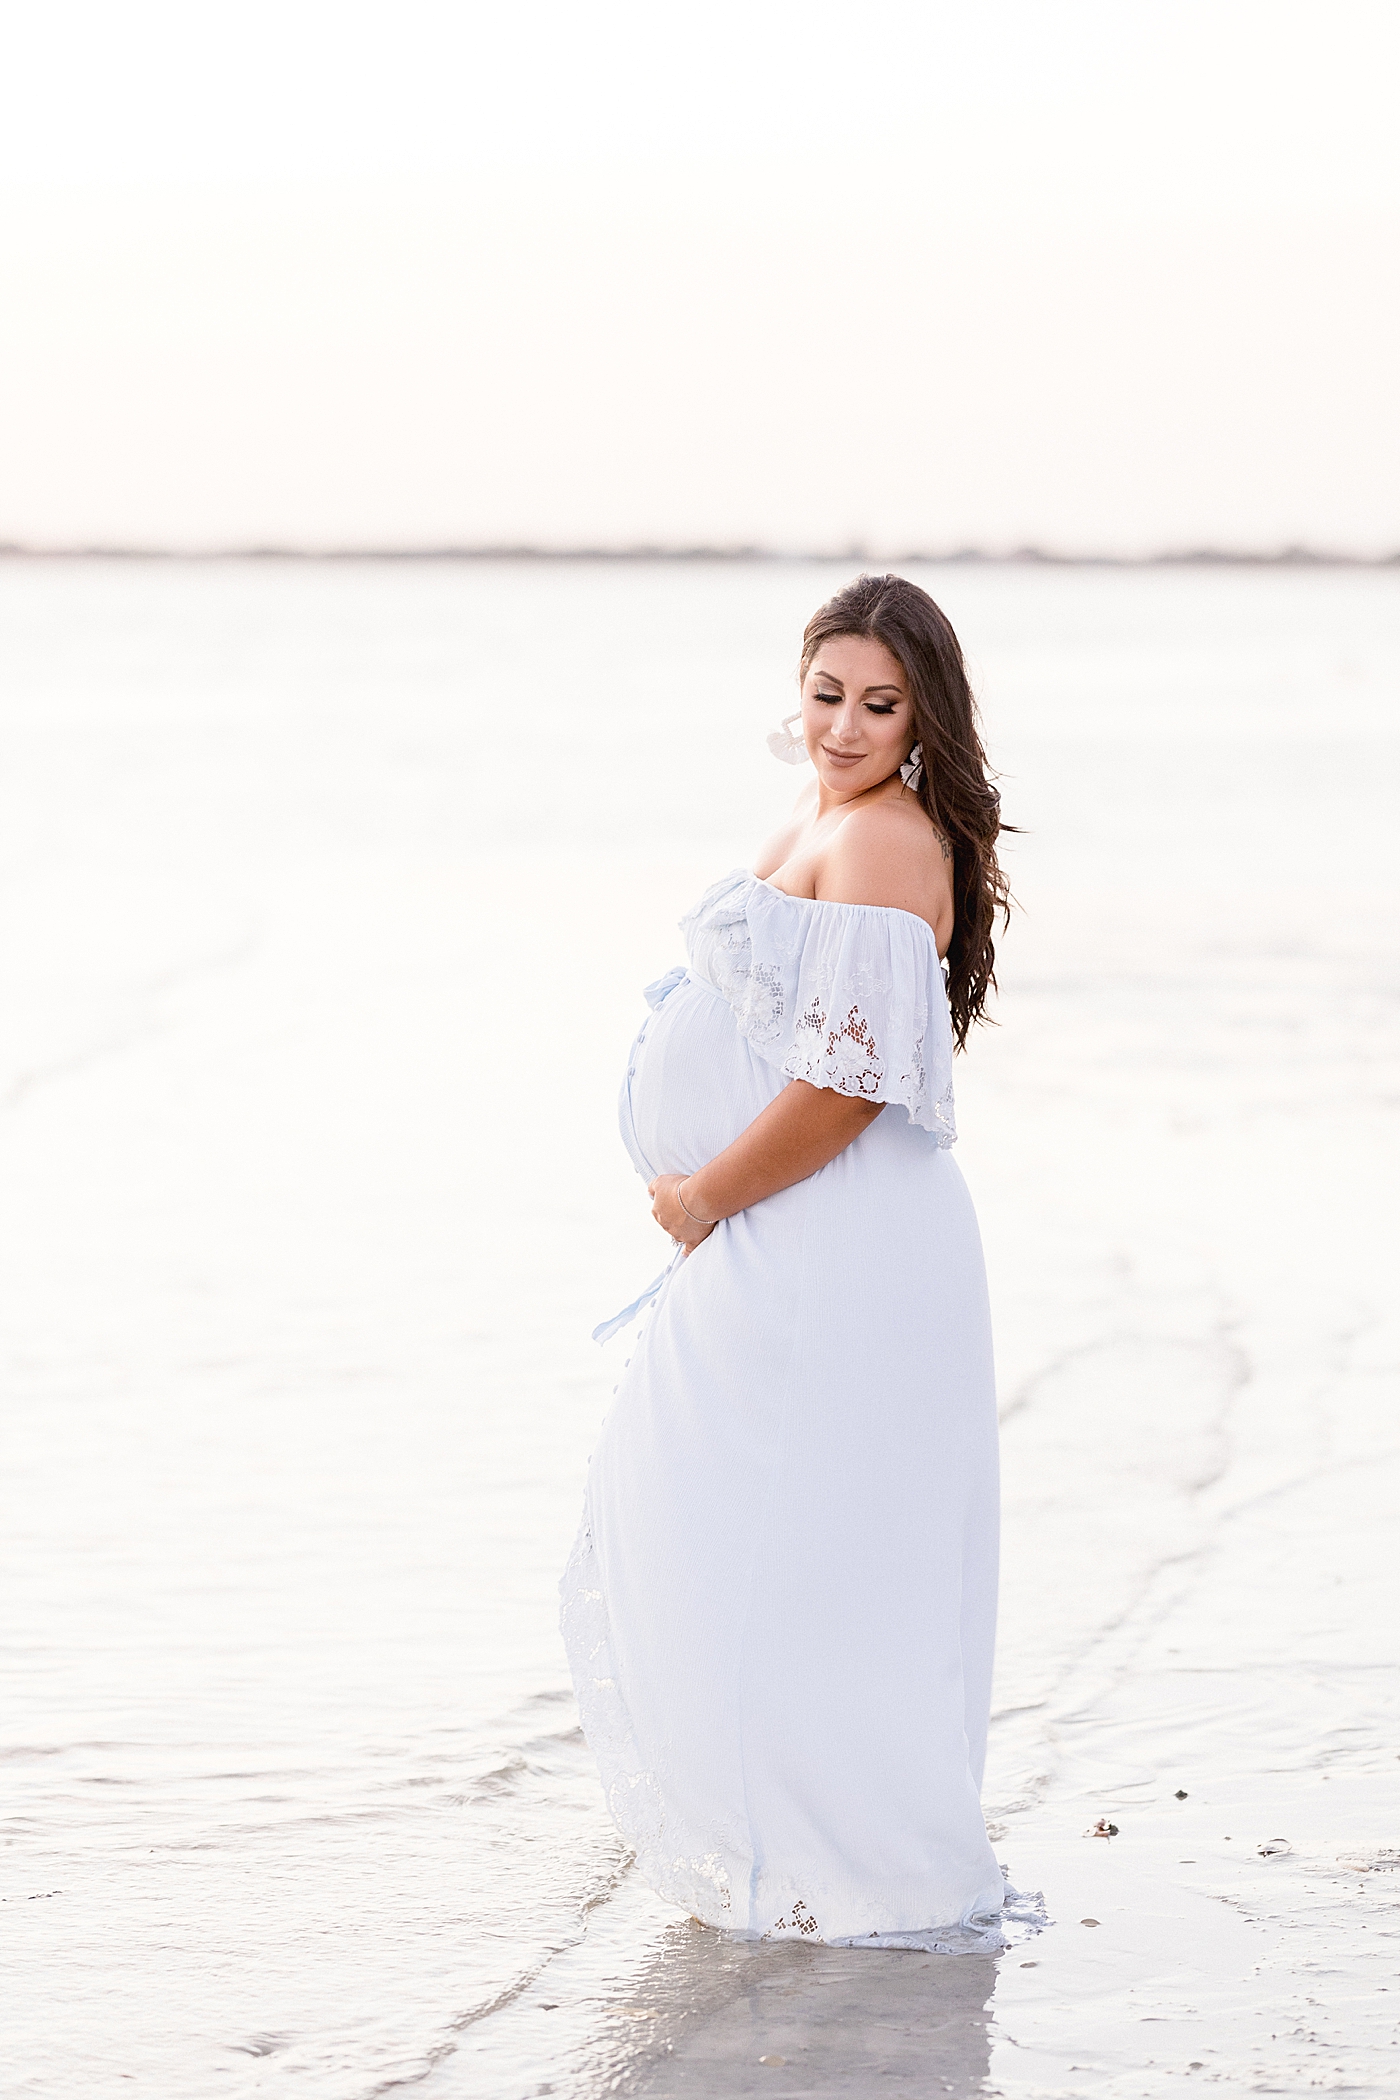 Pregnancy photoshoot in blue Fillyboo maternity dress. Photo by Brittany Elise Photography.